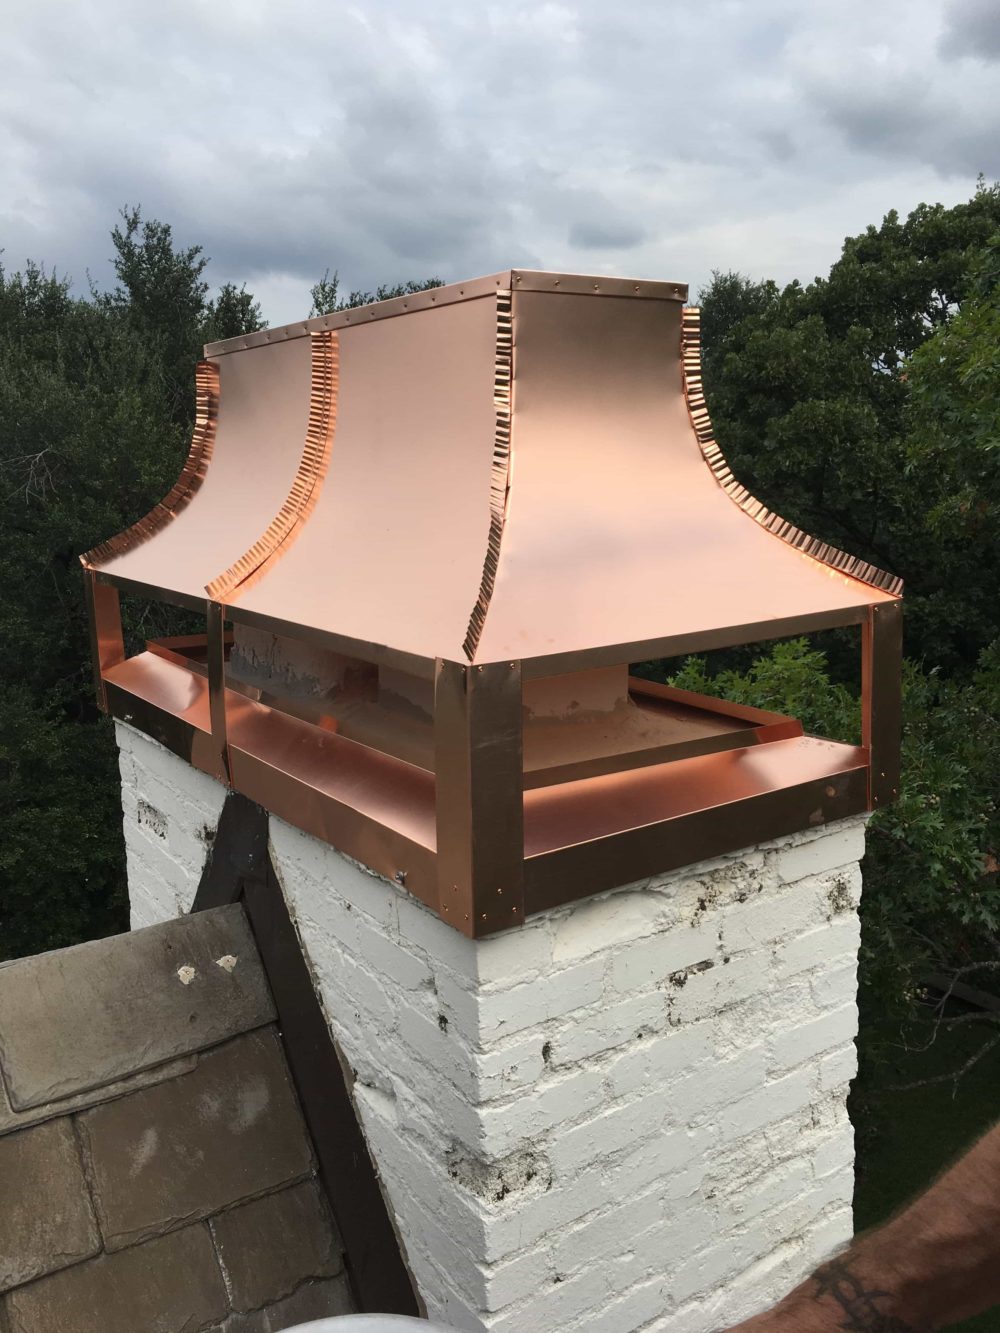 Copper Chimney Cap Made and Installed by Master Services